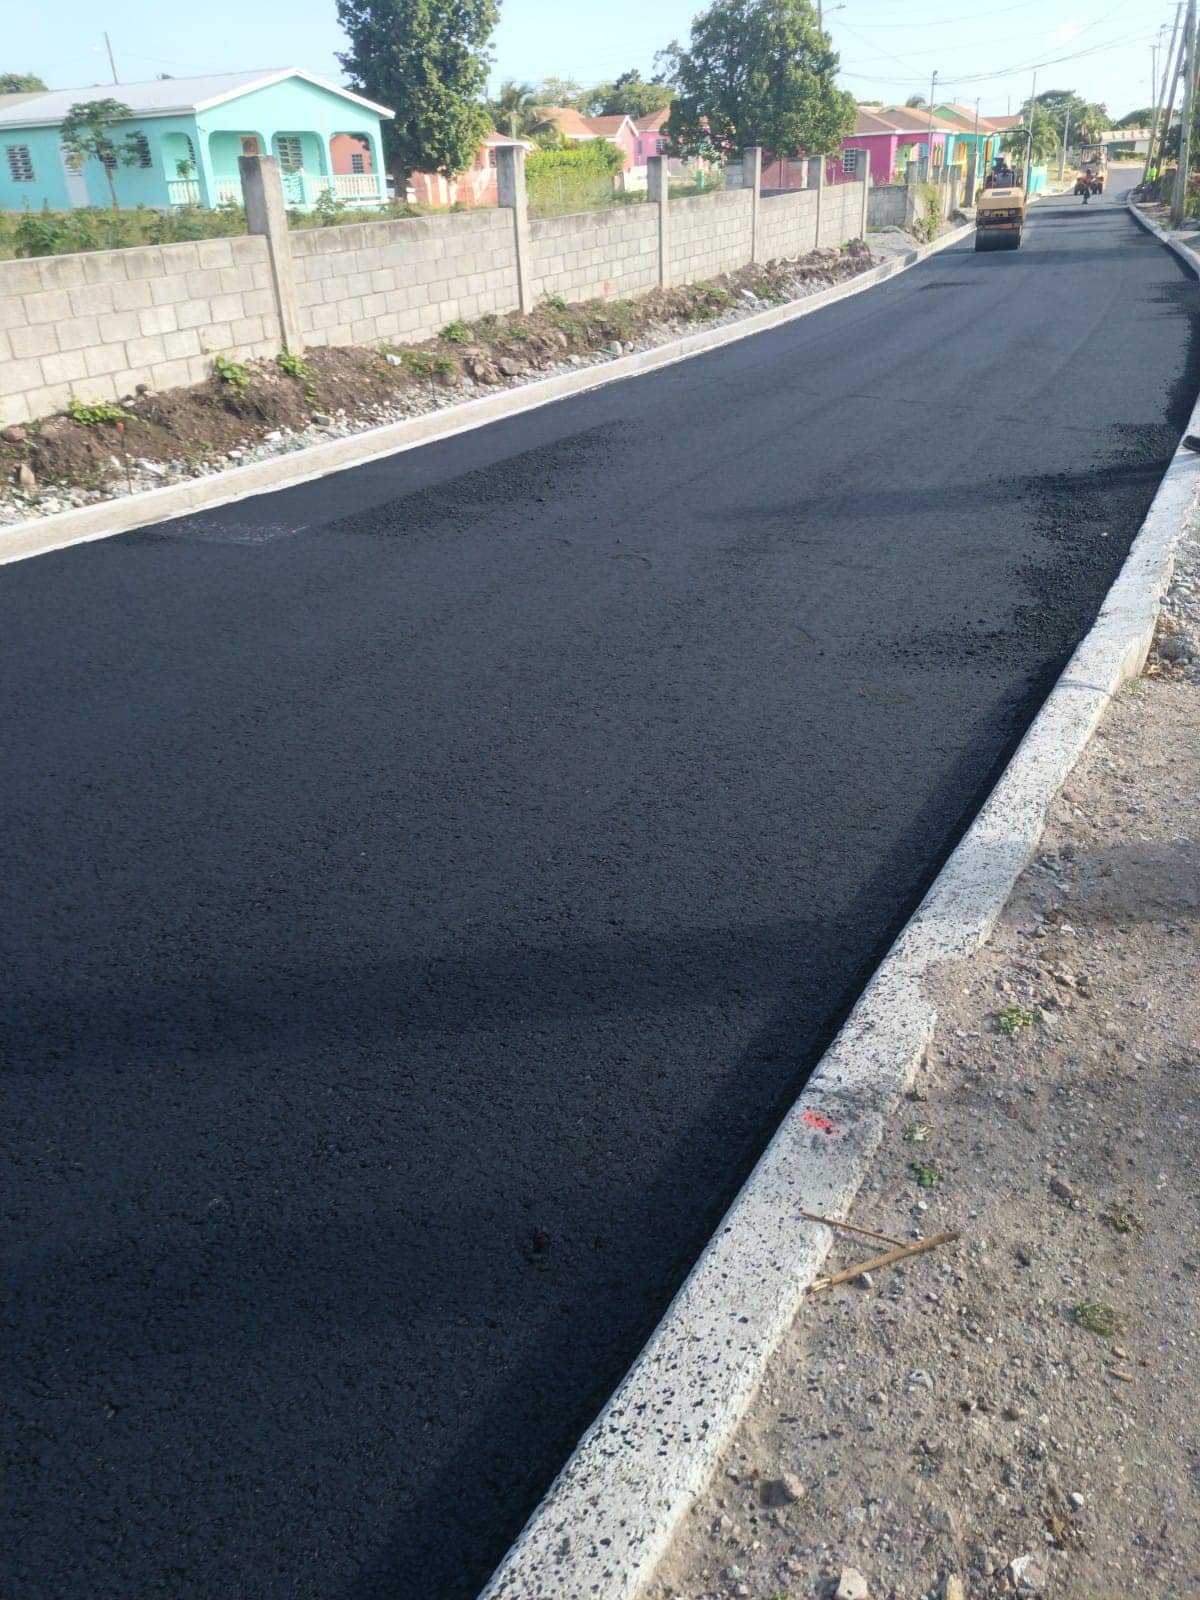 You are currently viewing First section of the Bath Village Road Responsibility Project – Paved